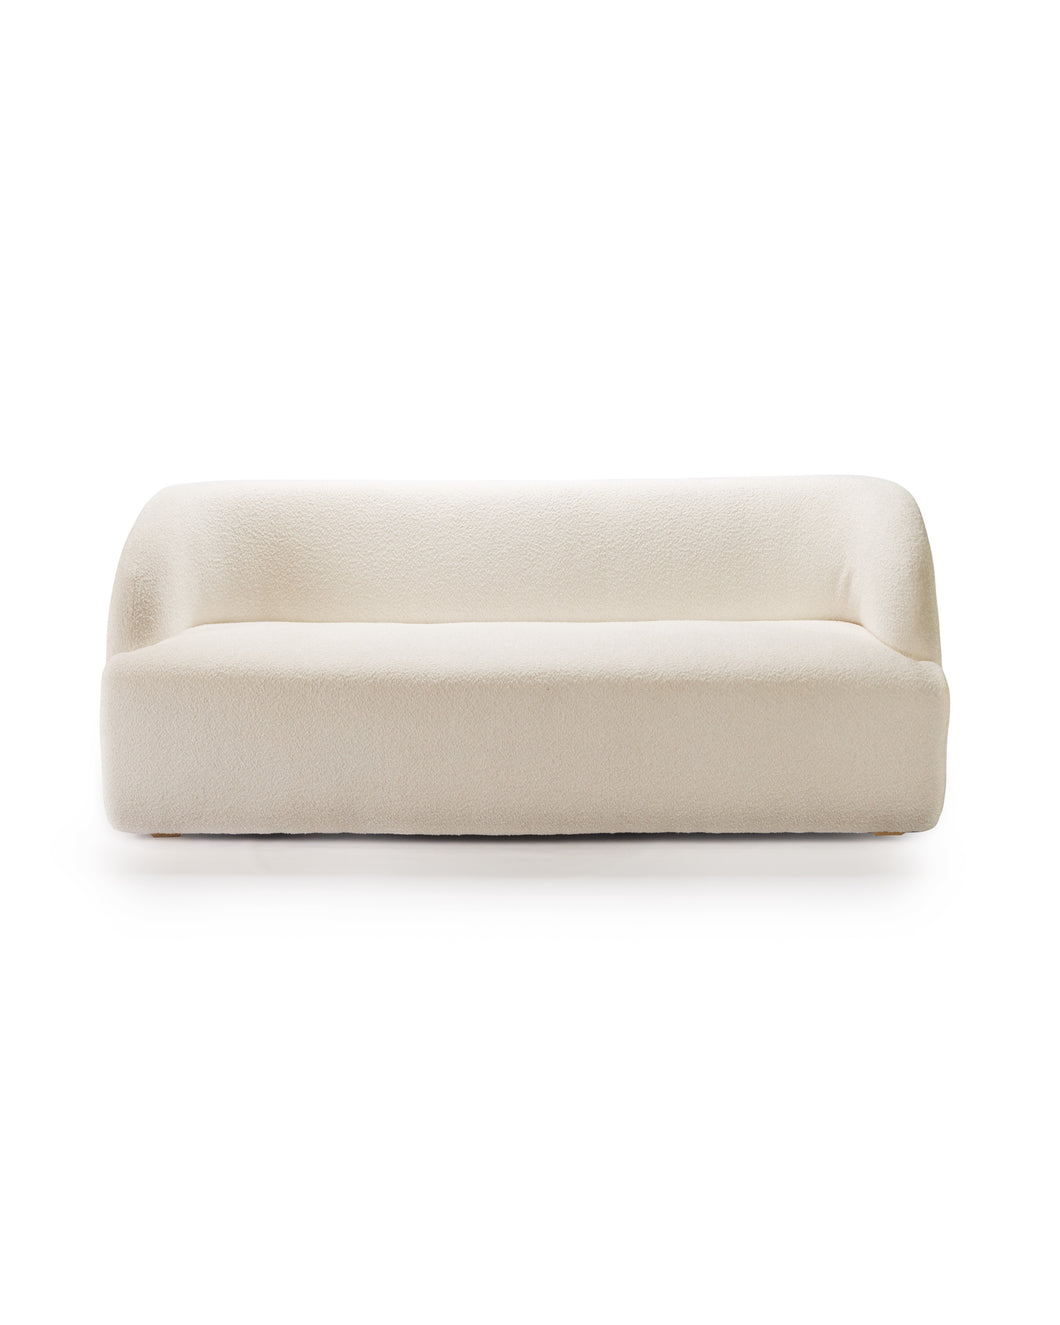 A Comet Two-Seater Sofa in pearl colour, upholstered in S/H Raffles fabric